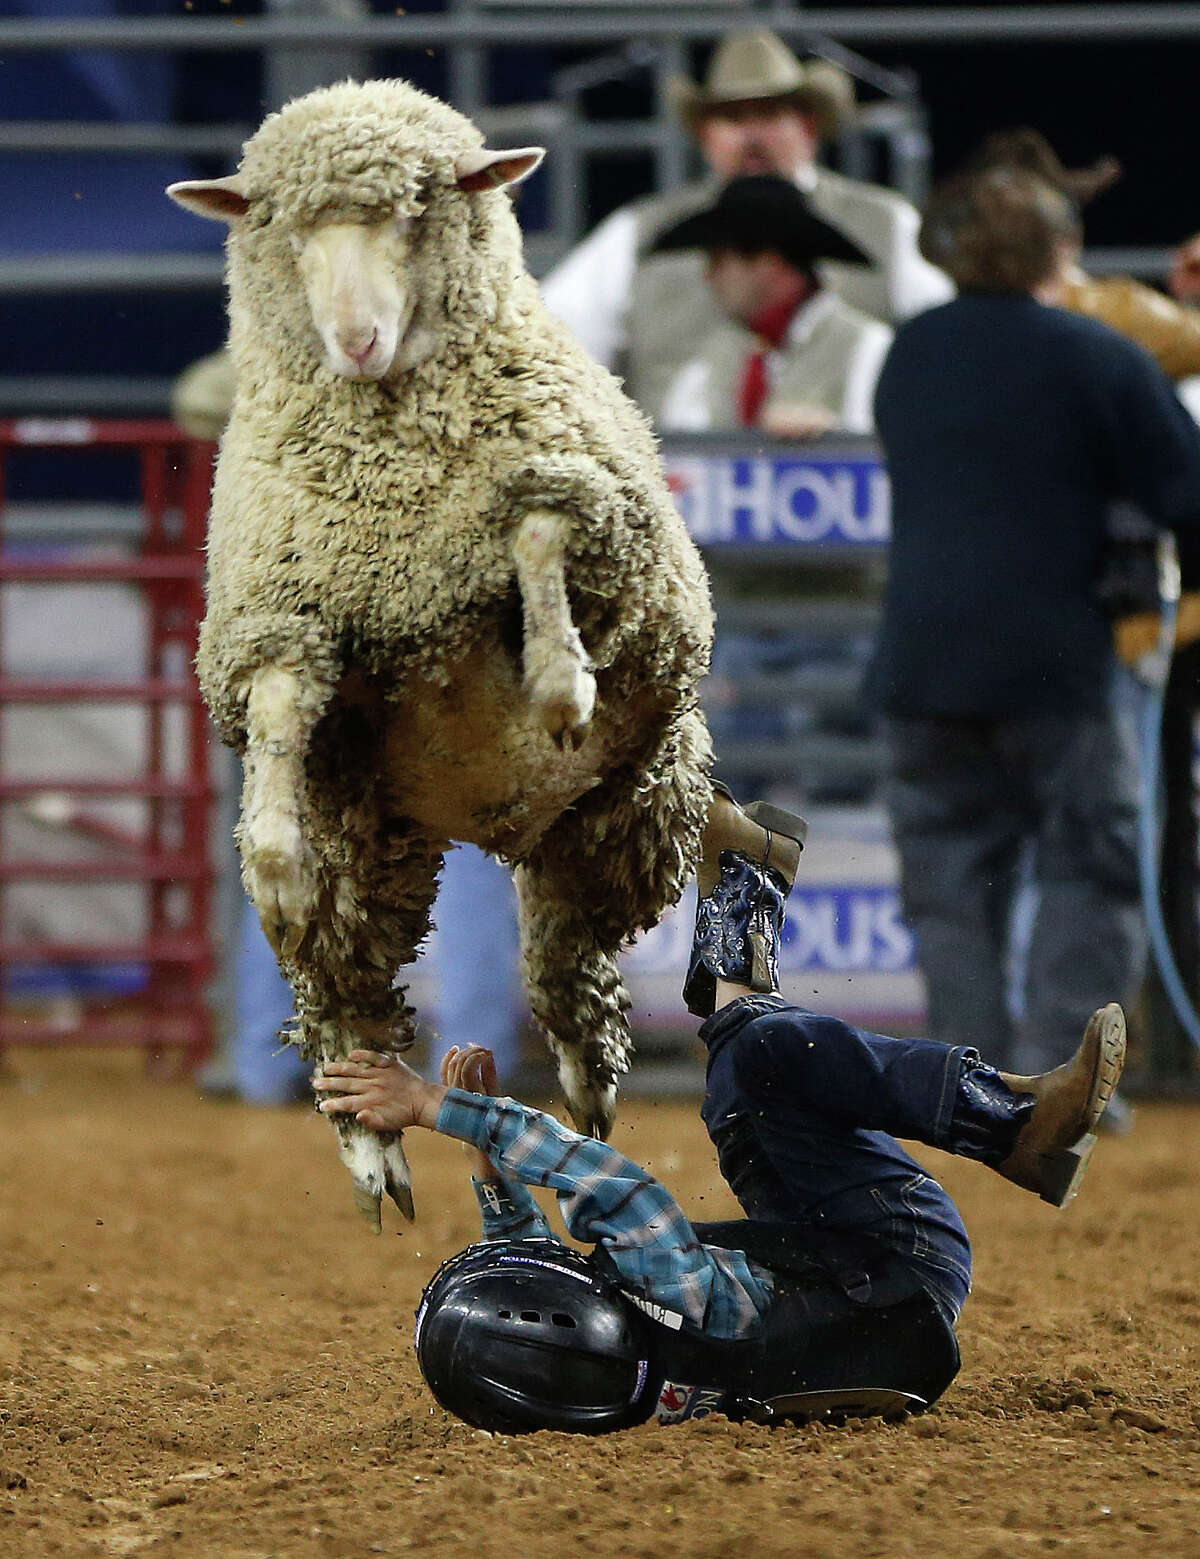 A sheep leaps over Carson Triola, 6, of Houston during the Mutton Bustin' event at the Houston Livestock Show and Rodeo in NRG Stadium, Saturday, March 19, 2016.